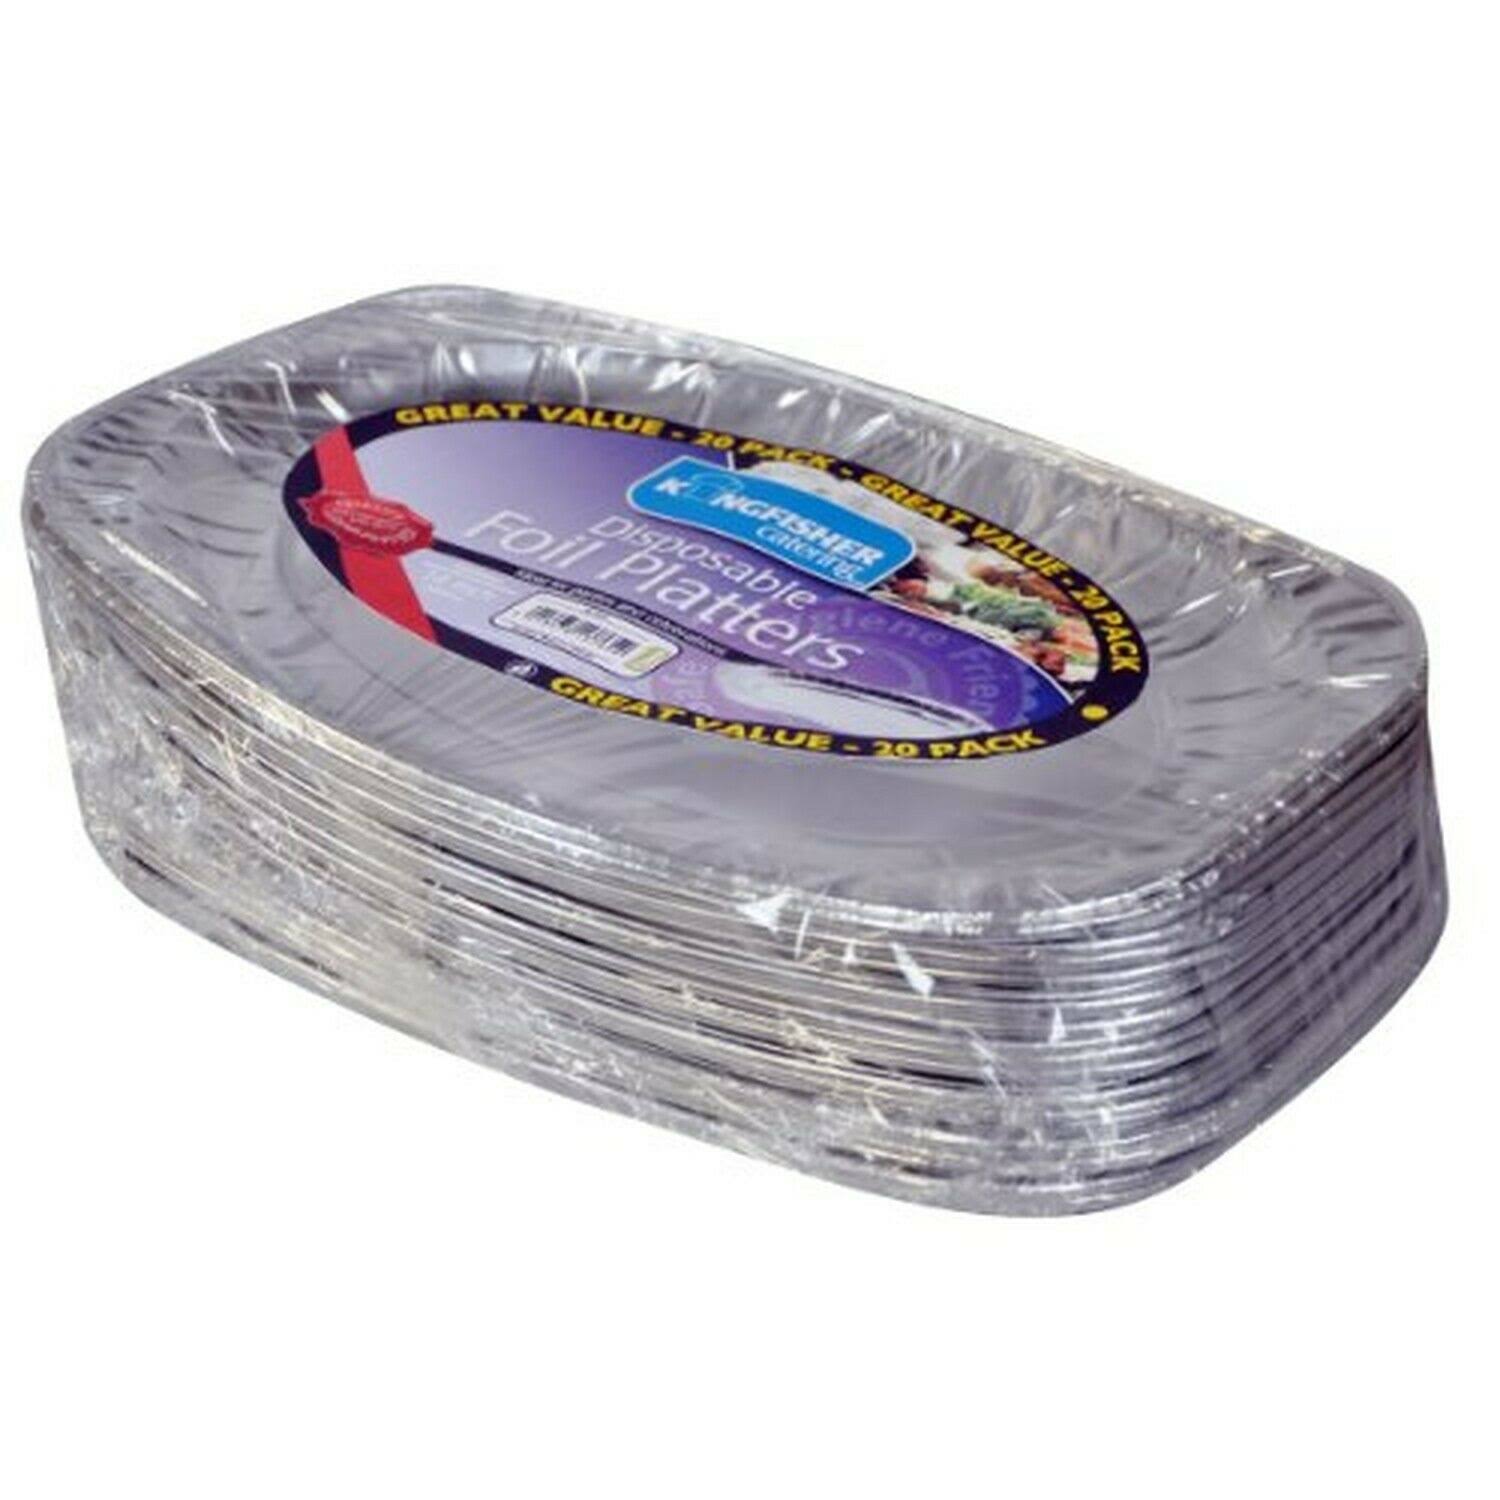 Kingfisher Disposable Catering Serving Party Foil Platters 14 Inches Pack Of 20